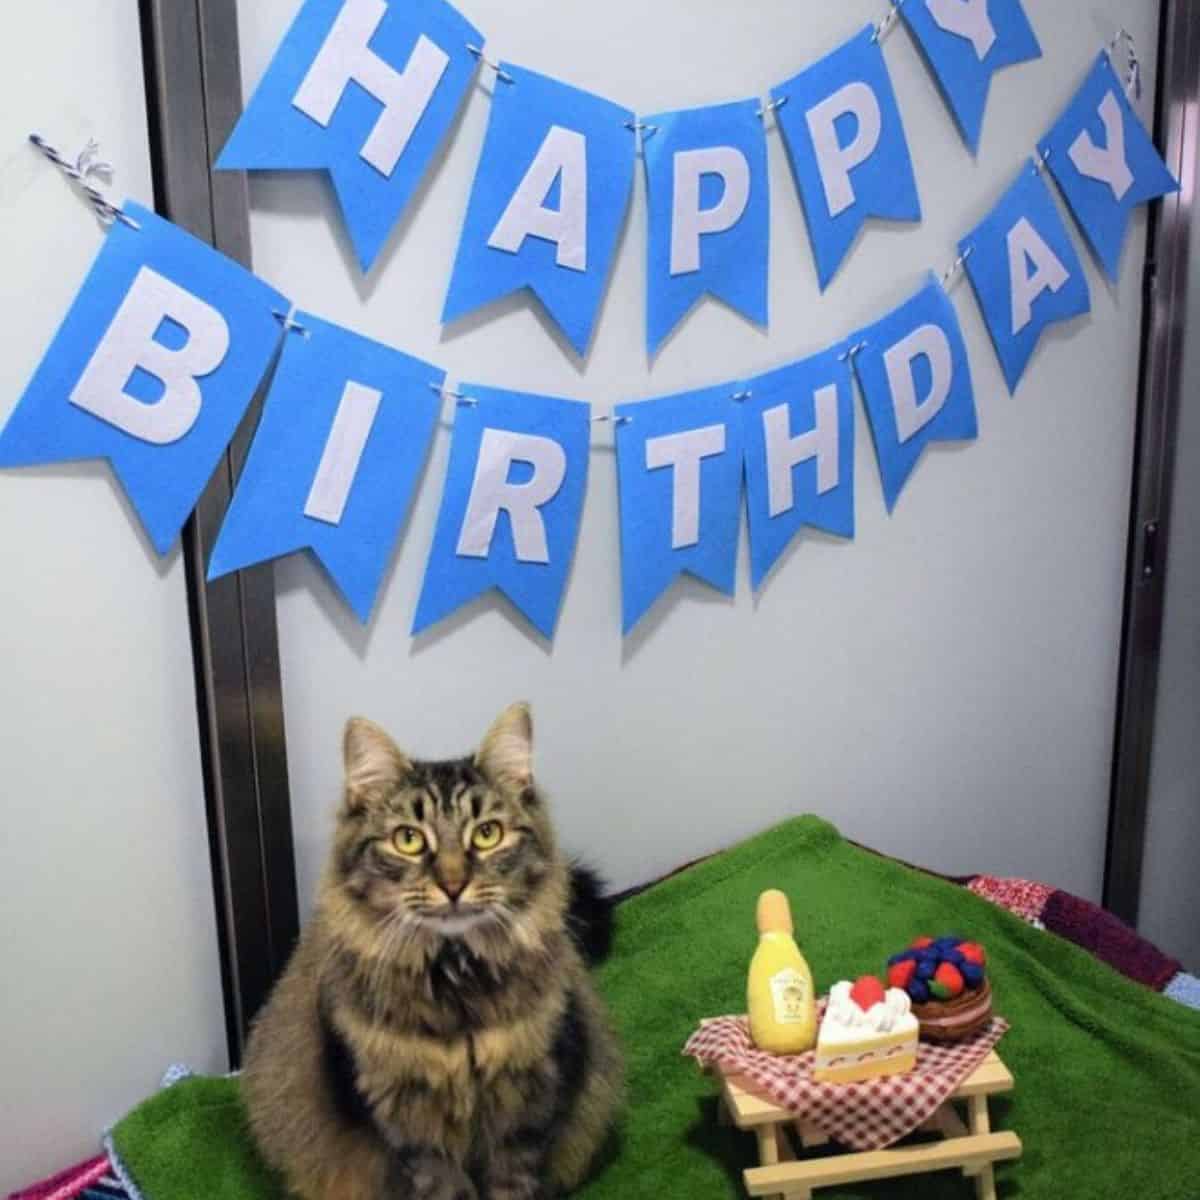 Monique the shelter cat poses next to her birthday decorations